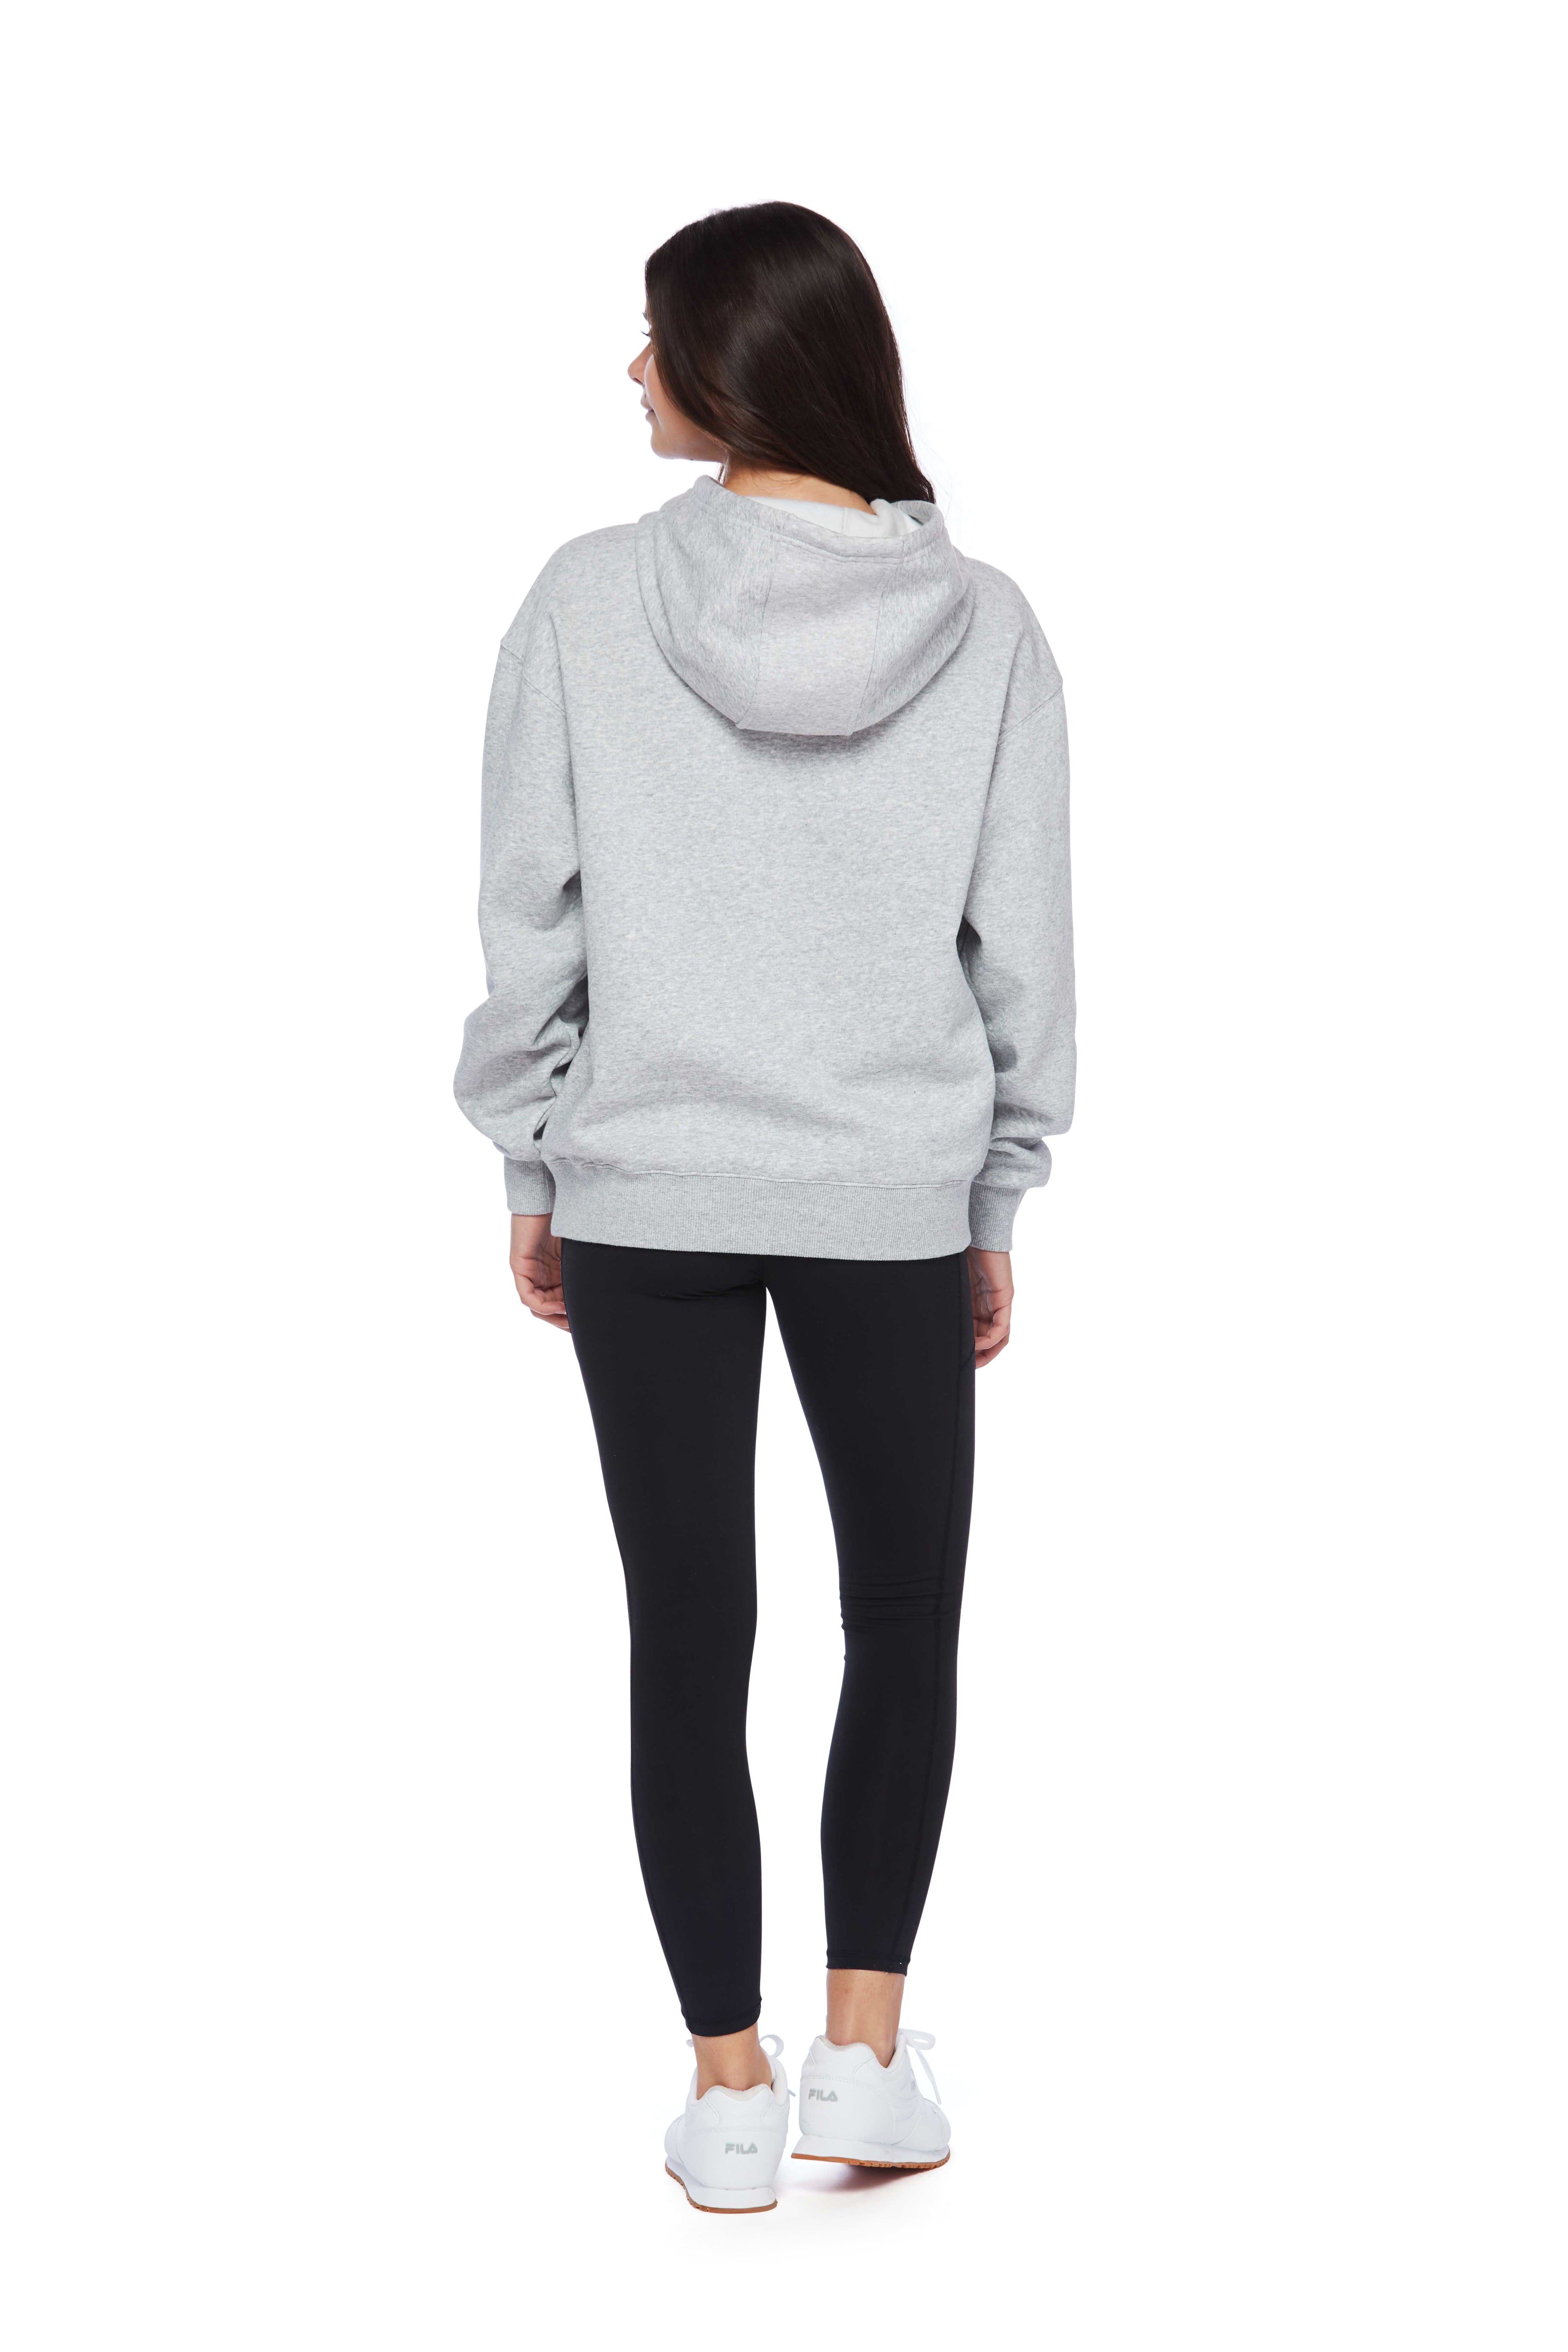 Cheeky relaxed hoodie in classic grey